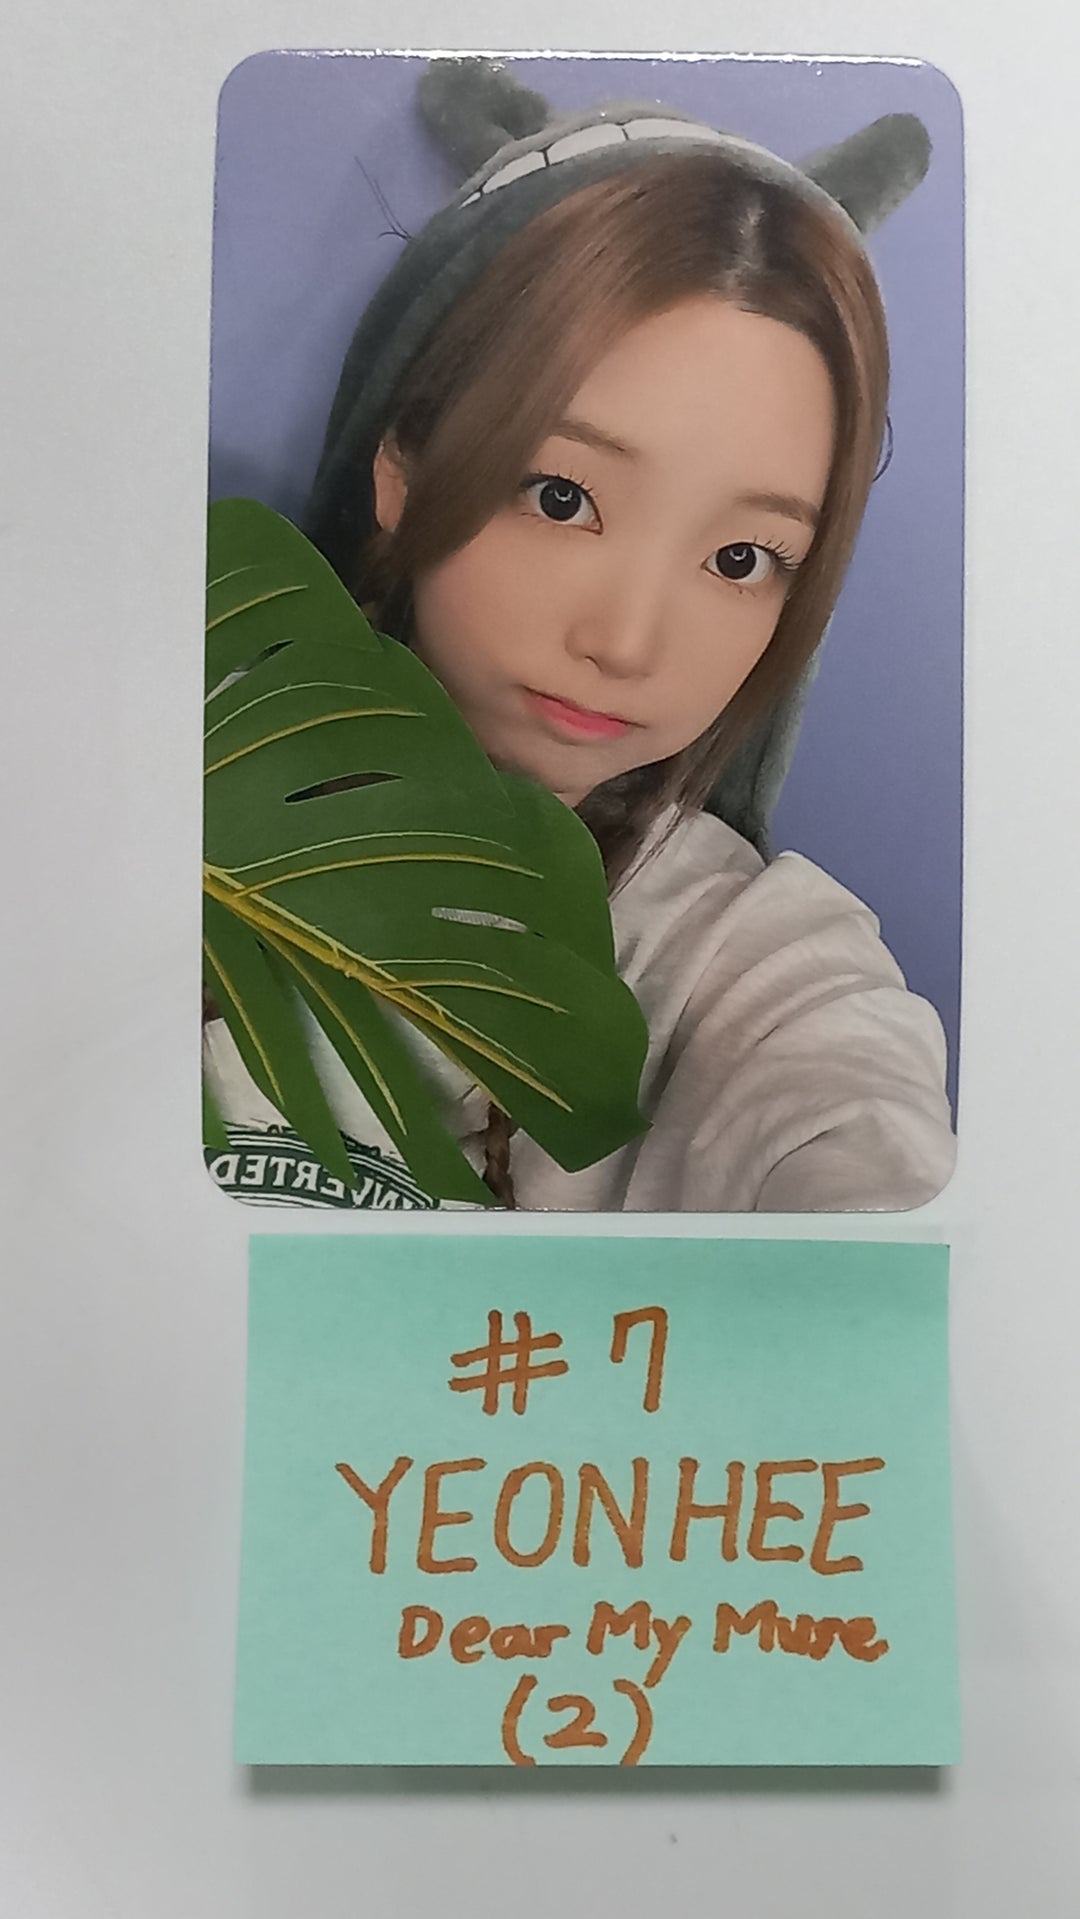 EL7Z U+P "7+UP" - Dear My Muse Fansign Event Photocard [23.11.16]